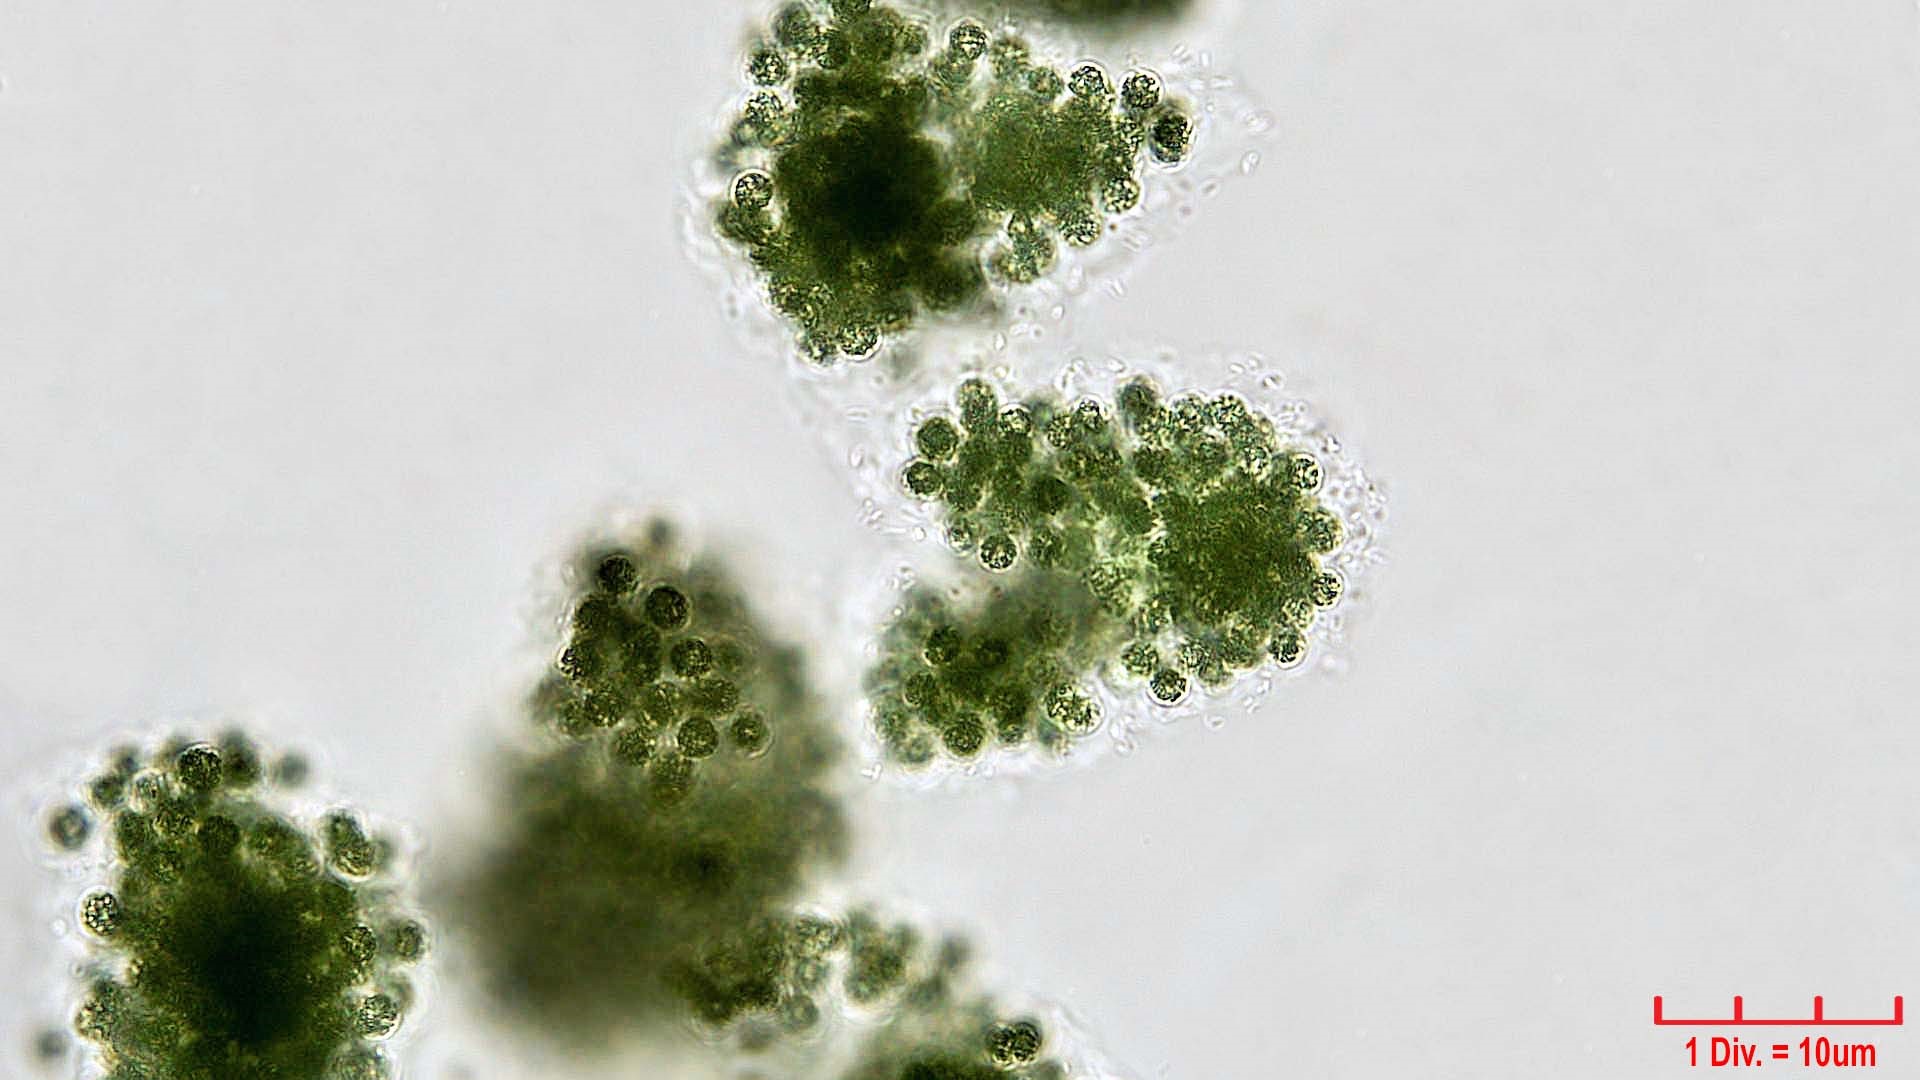 ./Cyanobacteria/Chroococcales/Microcystaceae/Microcystis/viridis/microcystis-viridis-66.jpg